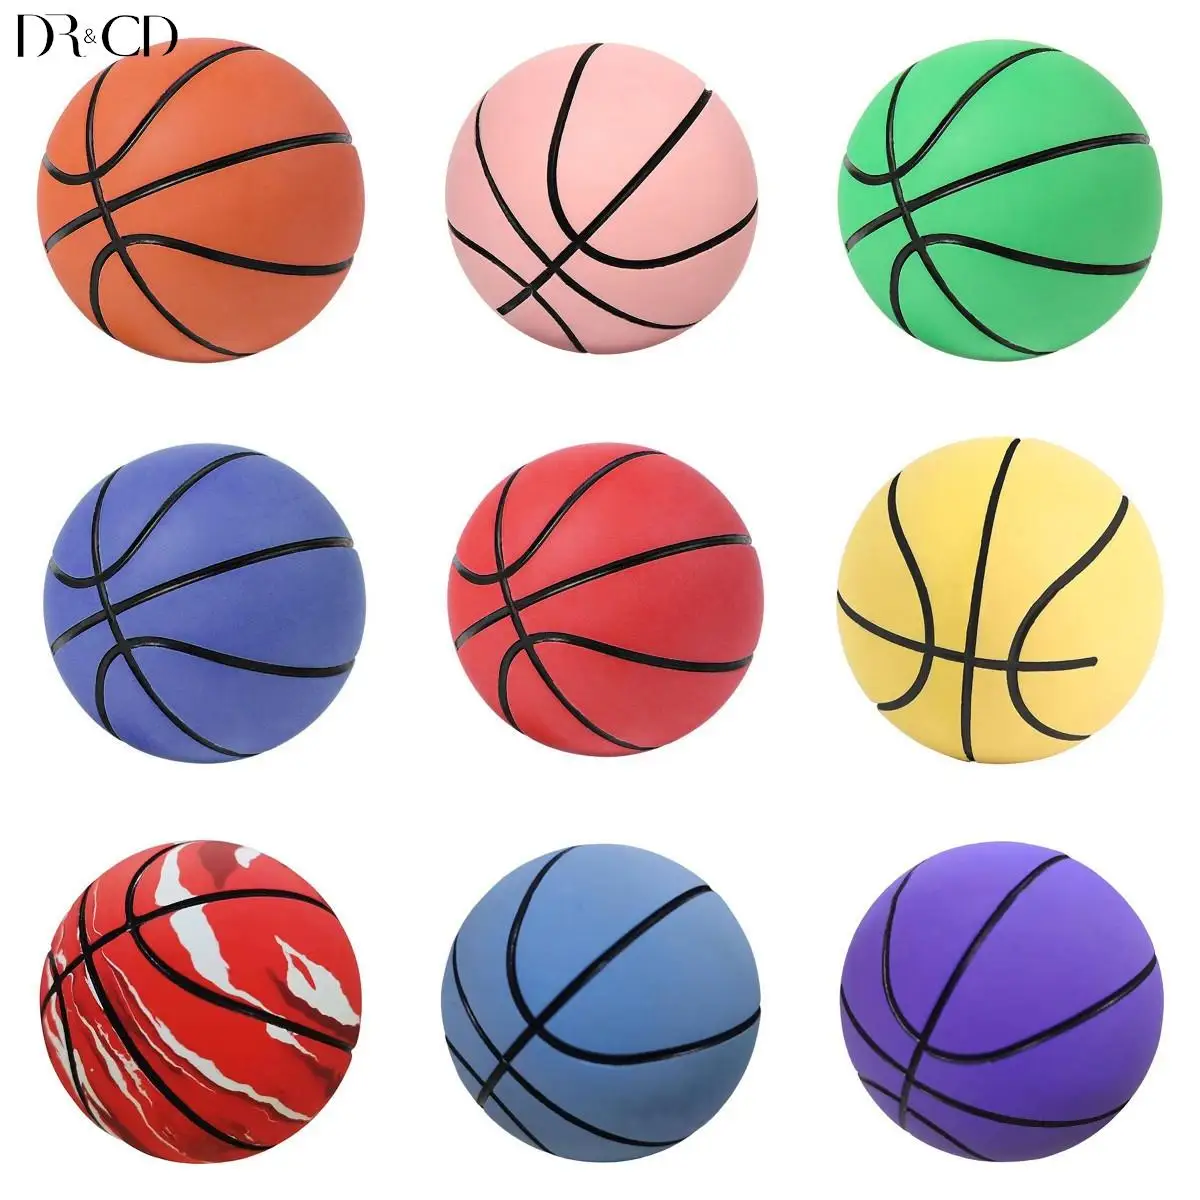 

6cm Rubber Balls Mini Basketball Jumping Bouncing Stress Ball Children Outdoor Toy Kids Reaction Training For Kids Party Gift